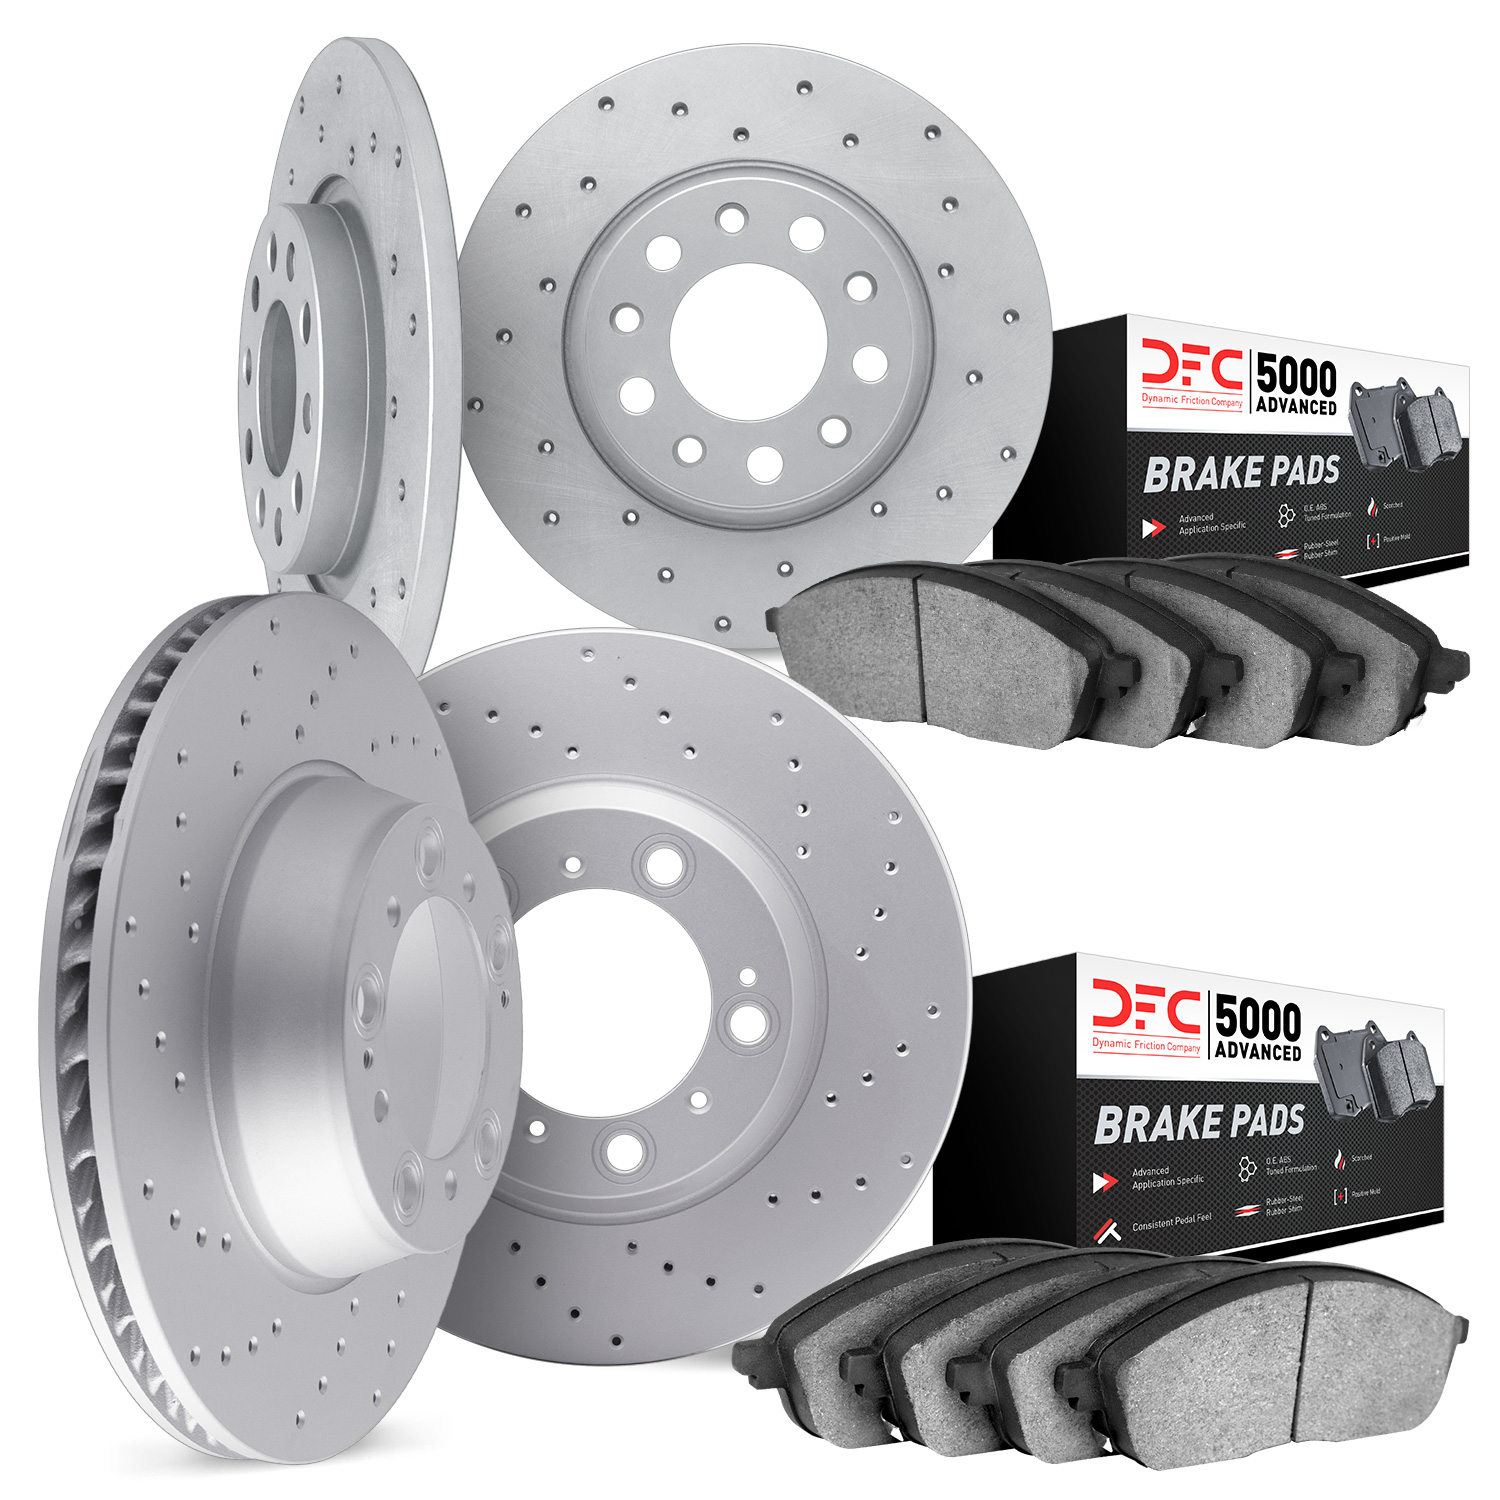 2704-31018 Geoperformance Drilled Brake Rotors with Active Performance Pads Kit, 1995-2001 BMW, Position: Front and Rear